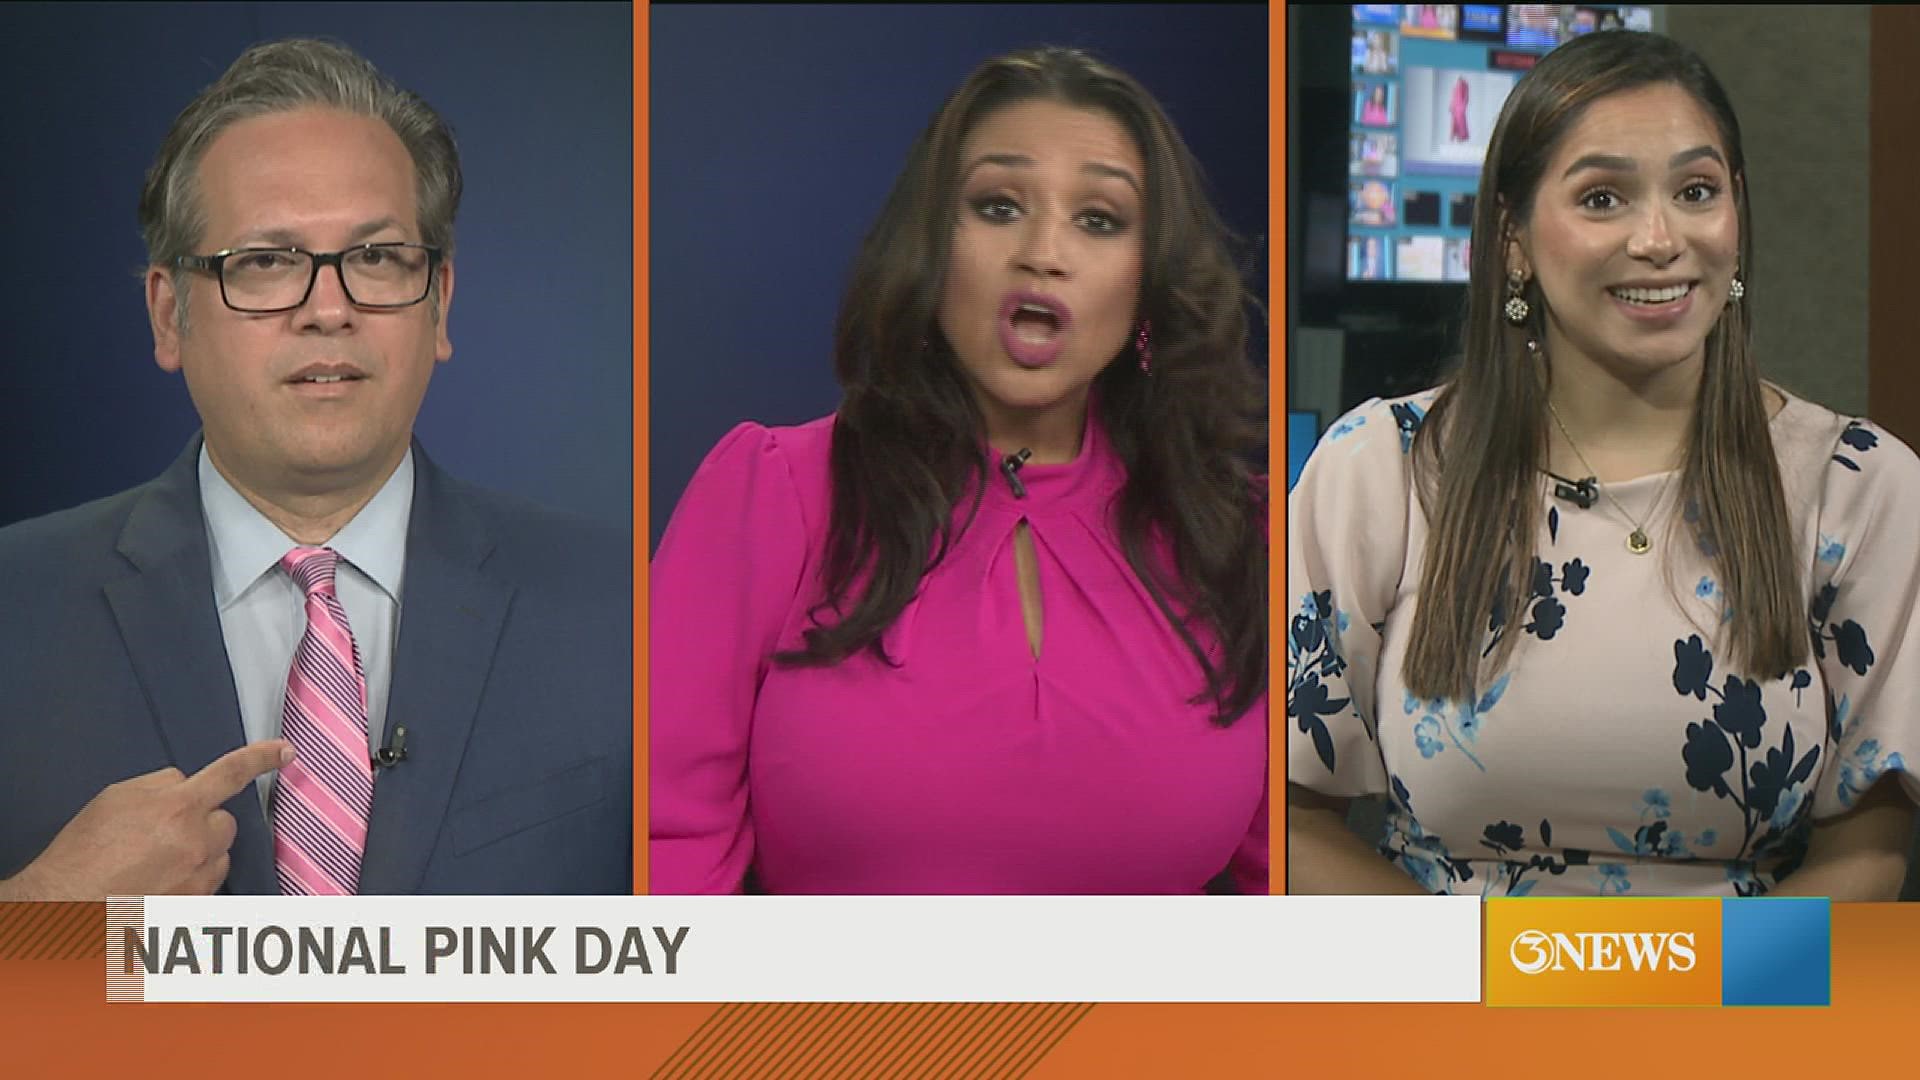 June 23rd is National Pink day, a time to celebrate all things pink. First Edition looked back at the history of this color and its influences throughout culture.